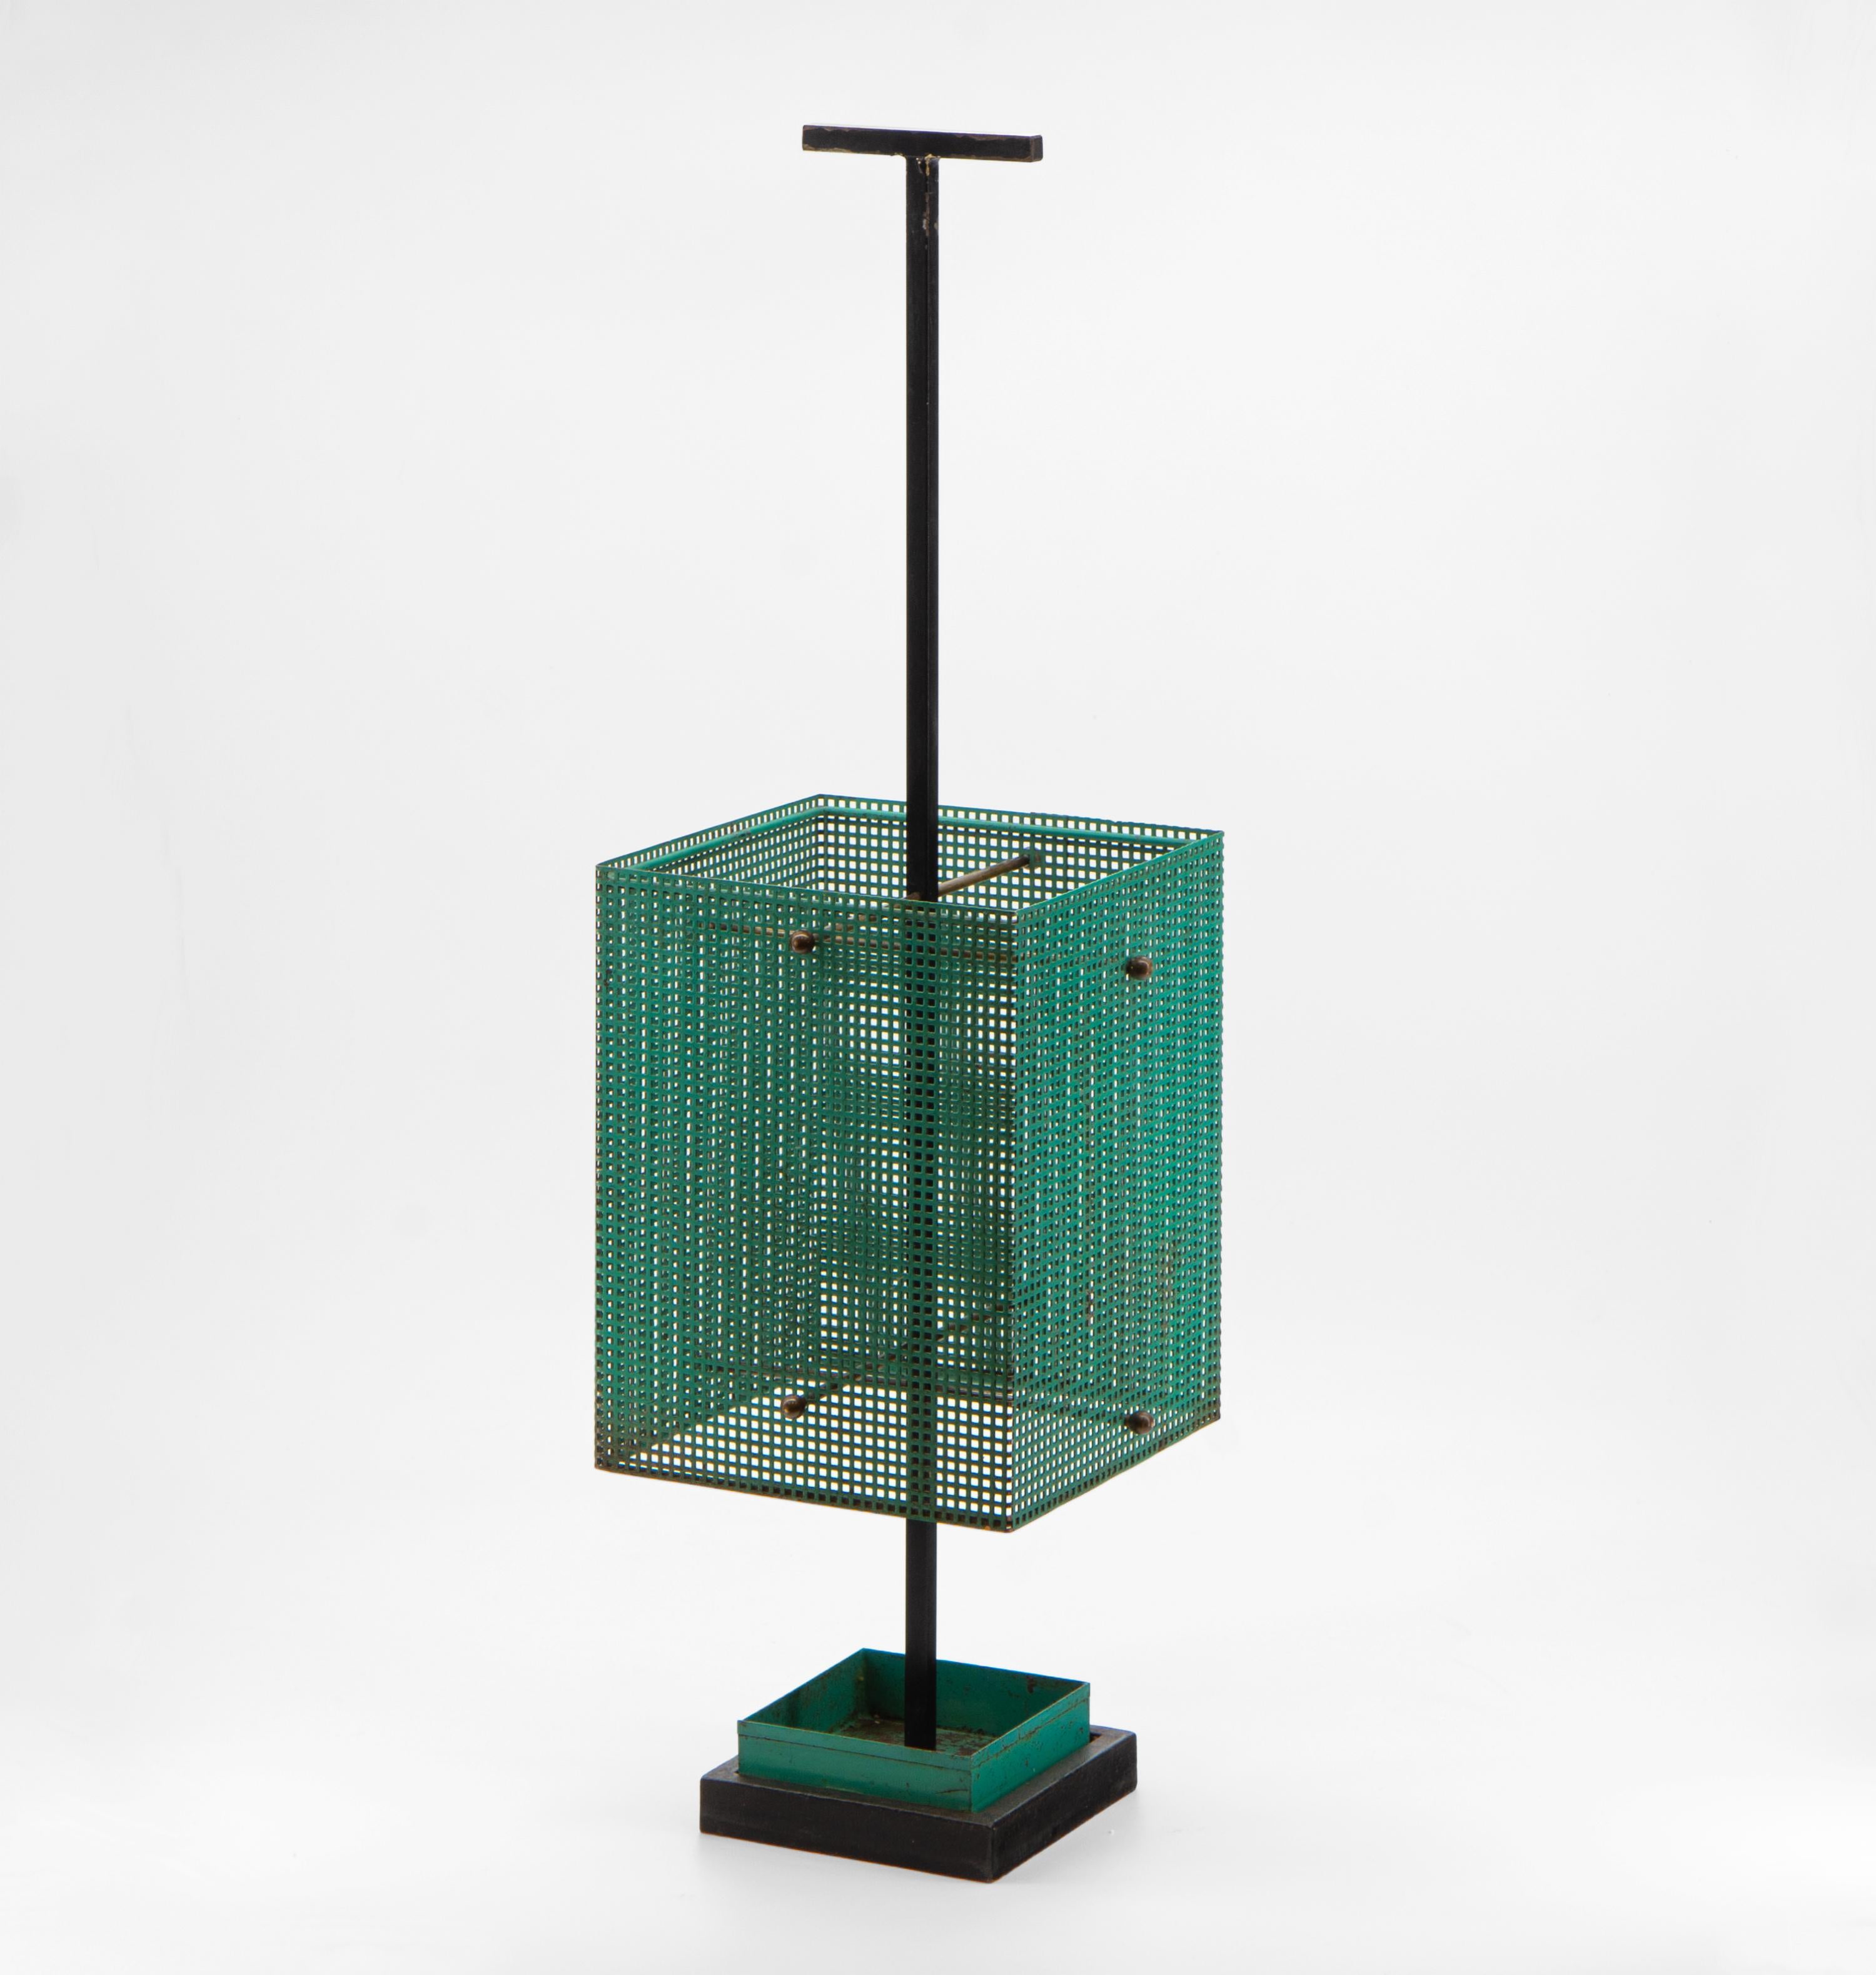 A sleek, minimalist mid-century Brutalist perforated metal umbrella stand. European - Circa 1950.

Free UK delivery.

The stand has the original green finish to the perforated metal. The drip tray is inset with a central T shape handle and brass